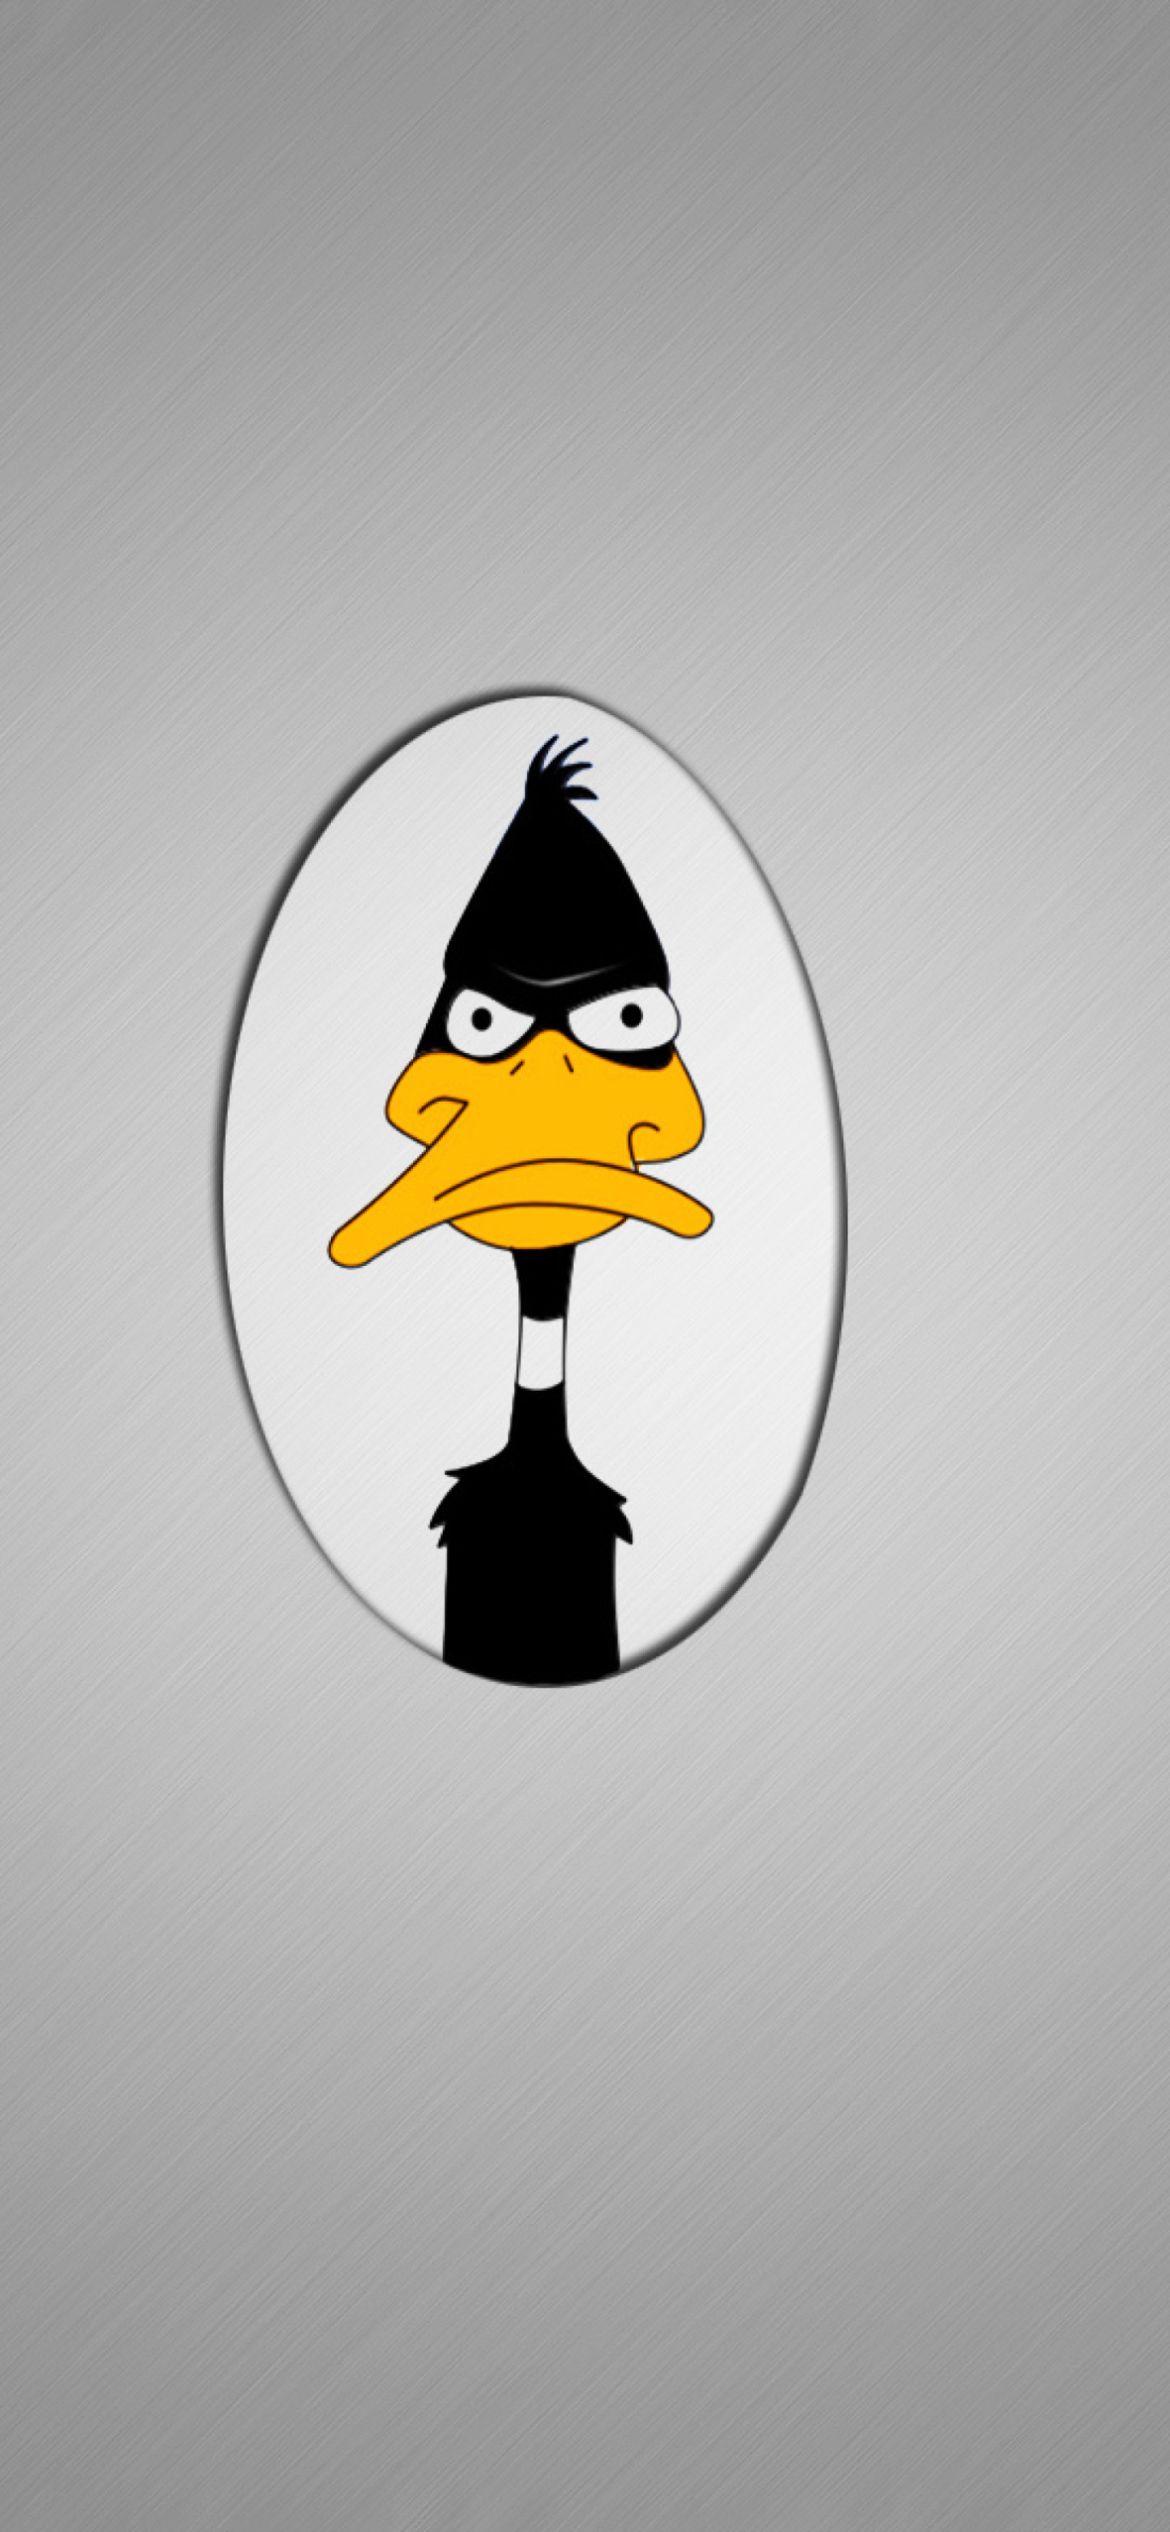 Daffy Duck Wallpaper for iPhone 12 Pro